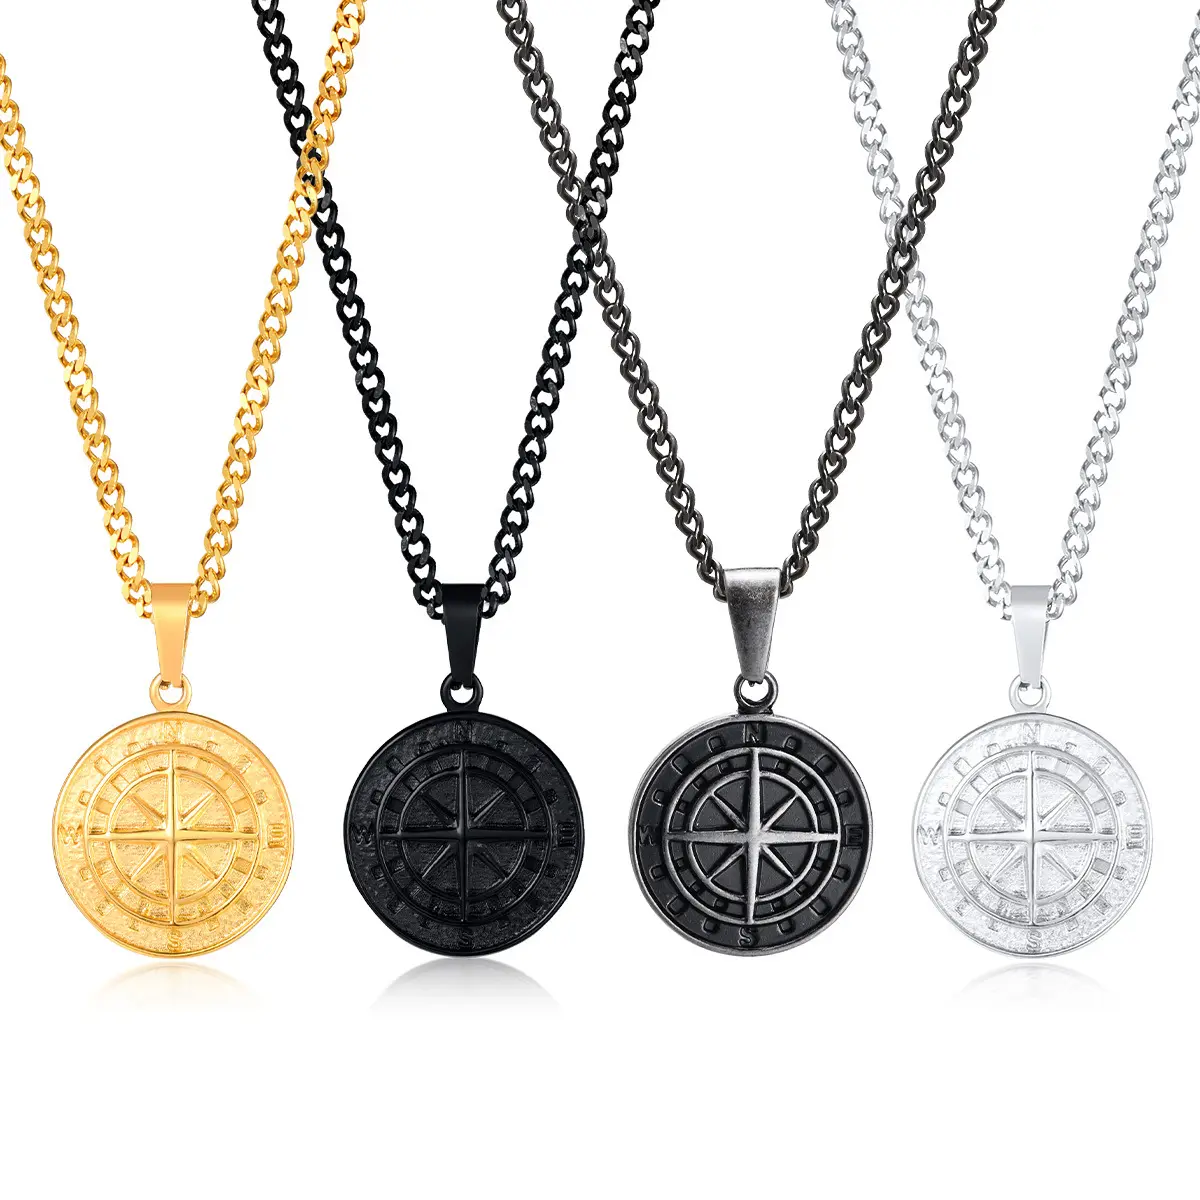 In Stock Fashion Jewelry Retro Black Silver Color 18K Gold Plated Stainless Steel Compass Necklace Men